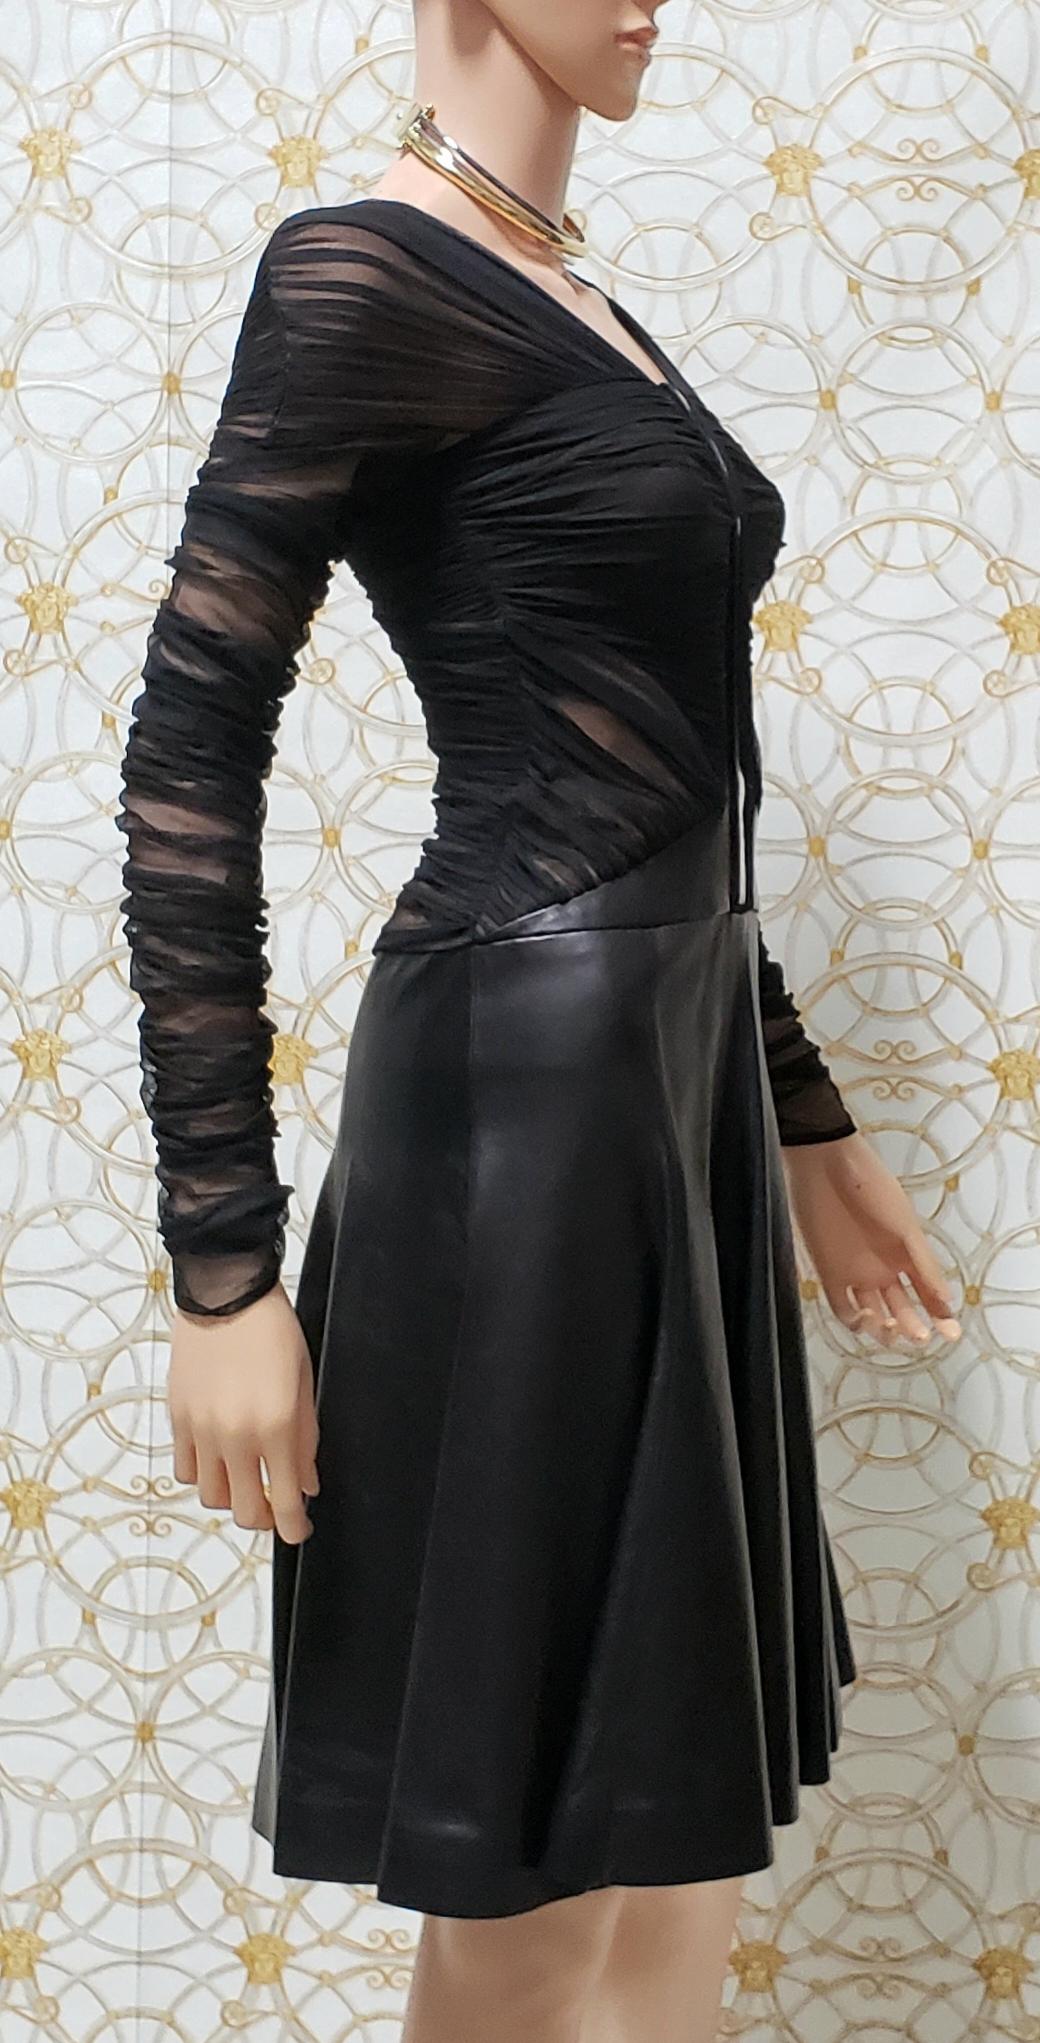 New VERSACE BLACK TULLE and LEATHER DRESS 40 - 4 In New Condition For Sale In Montgomery, TX